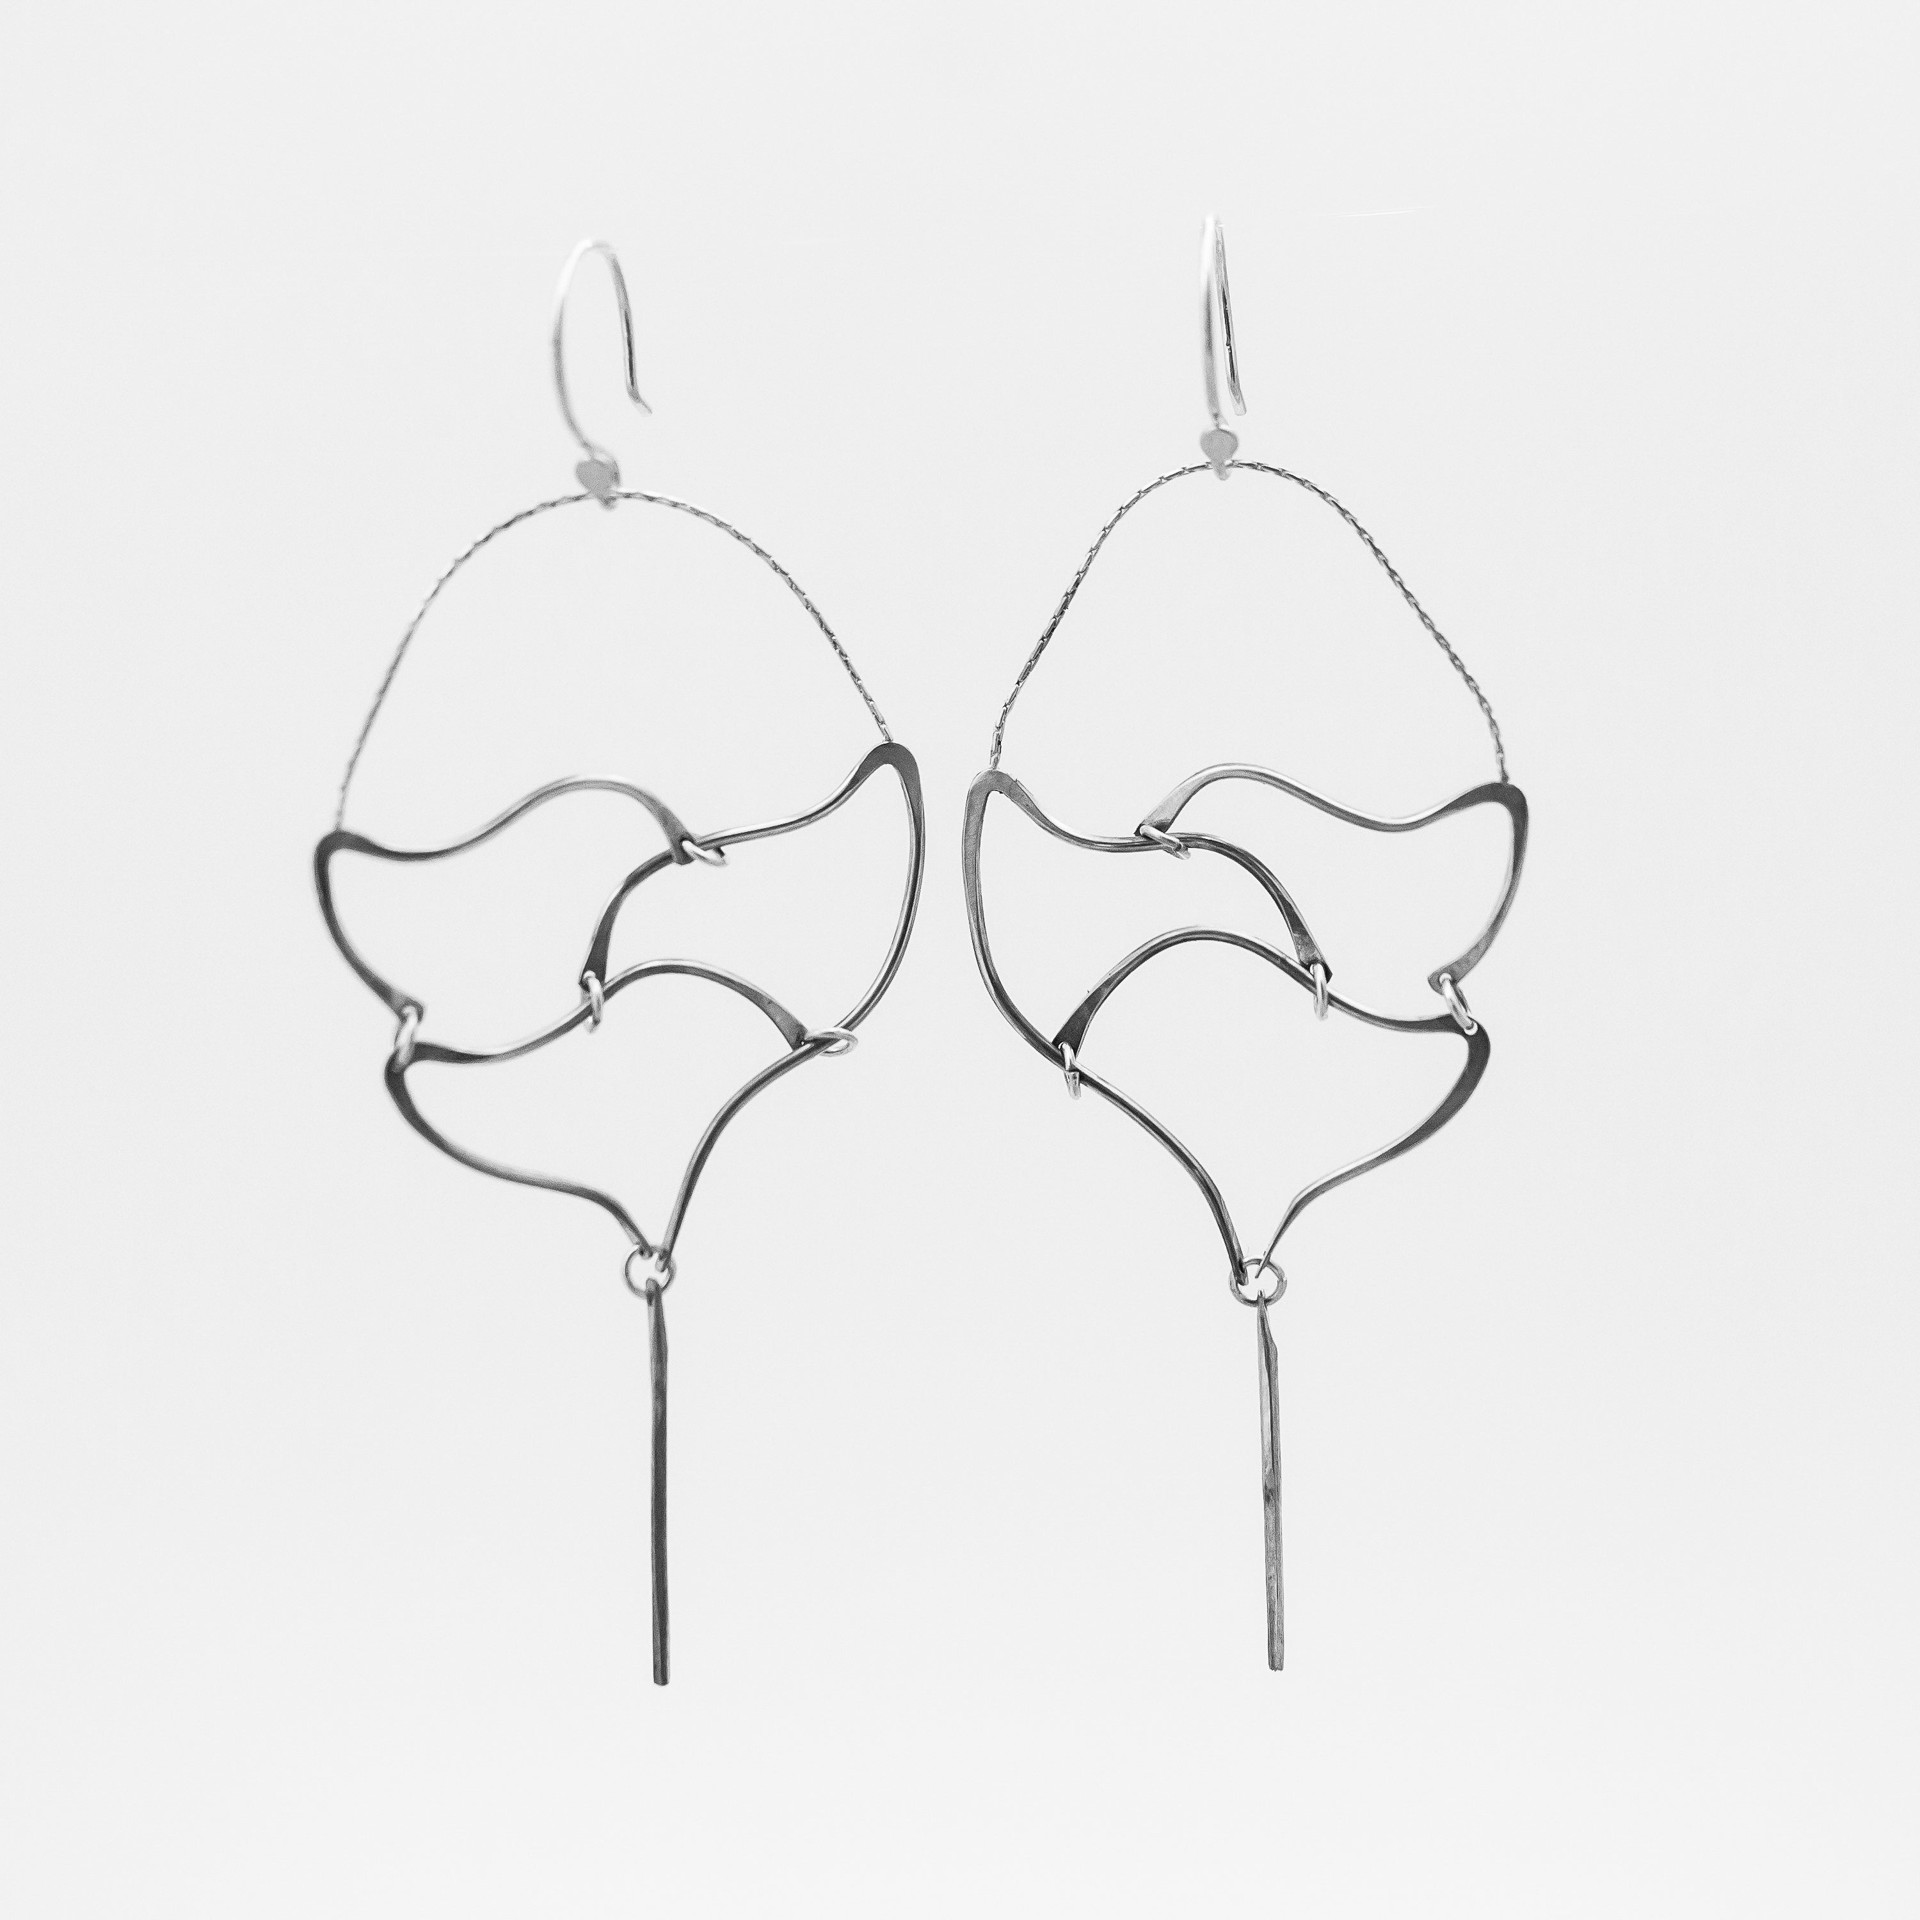 Agave Earrings - Silver by Clementine & Co. Jewelry